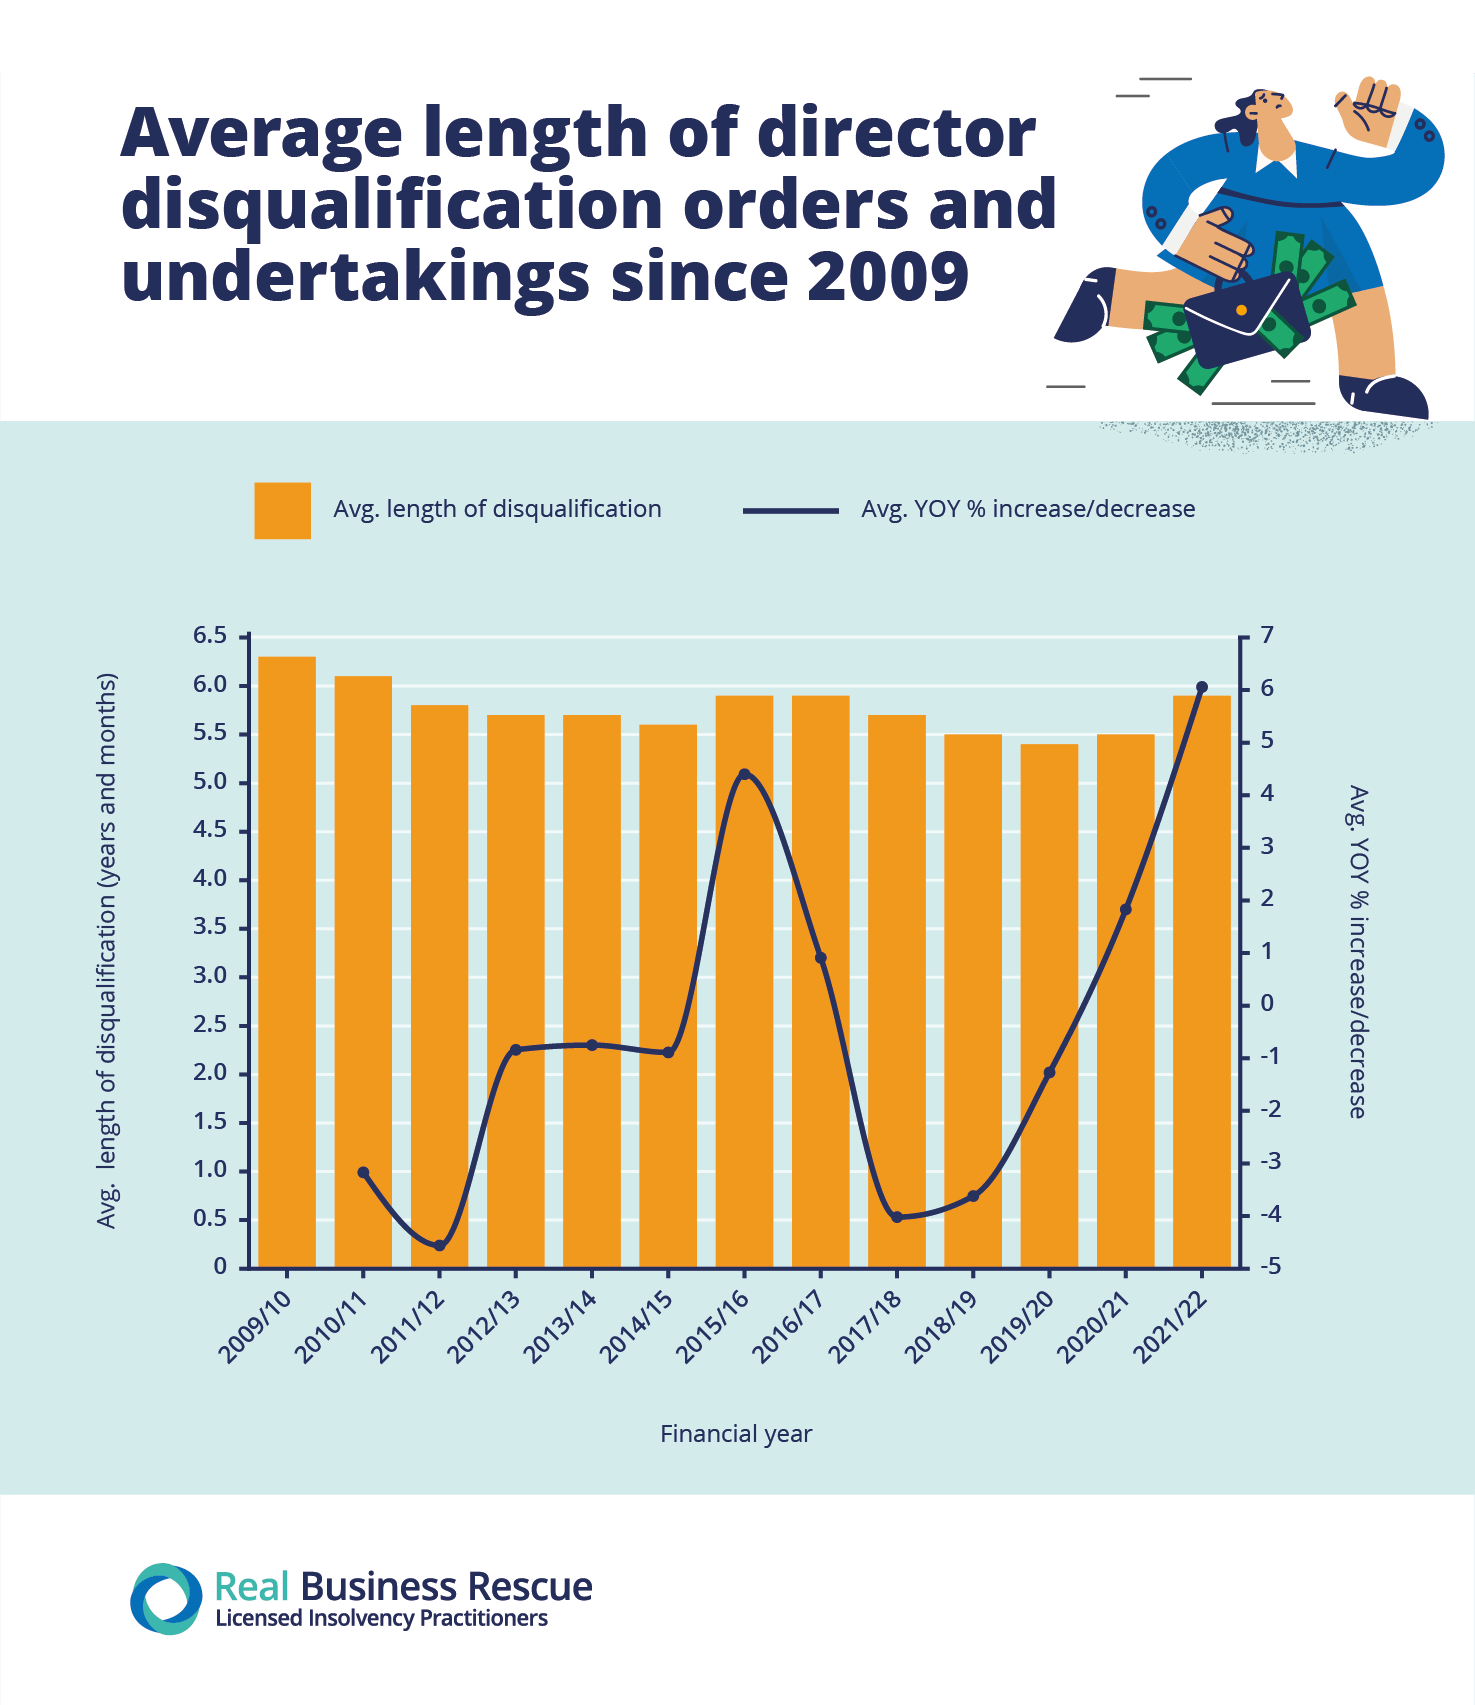 Graphic showing the average length of director disqualification orders since 2009.